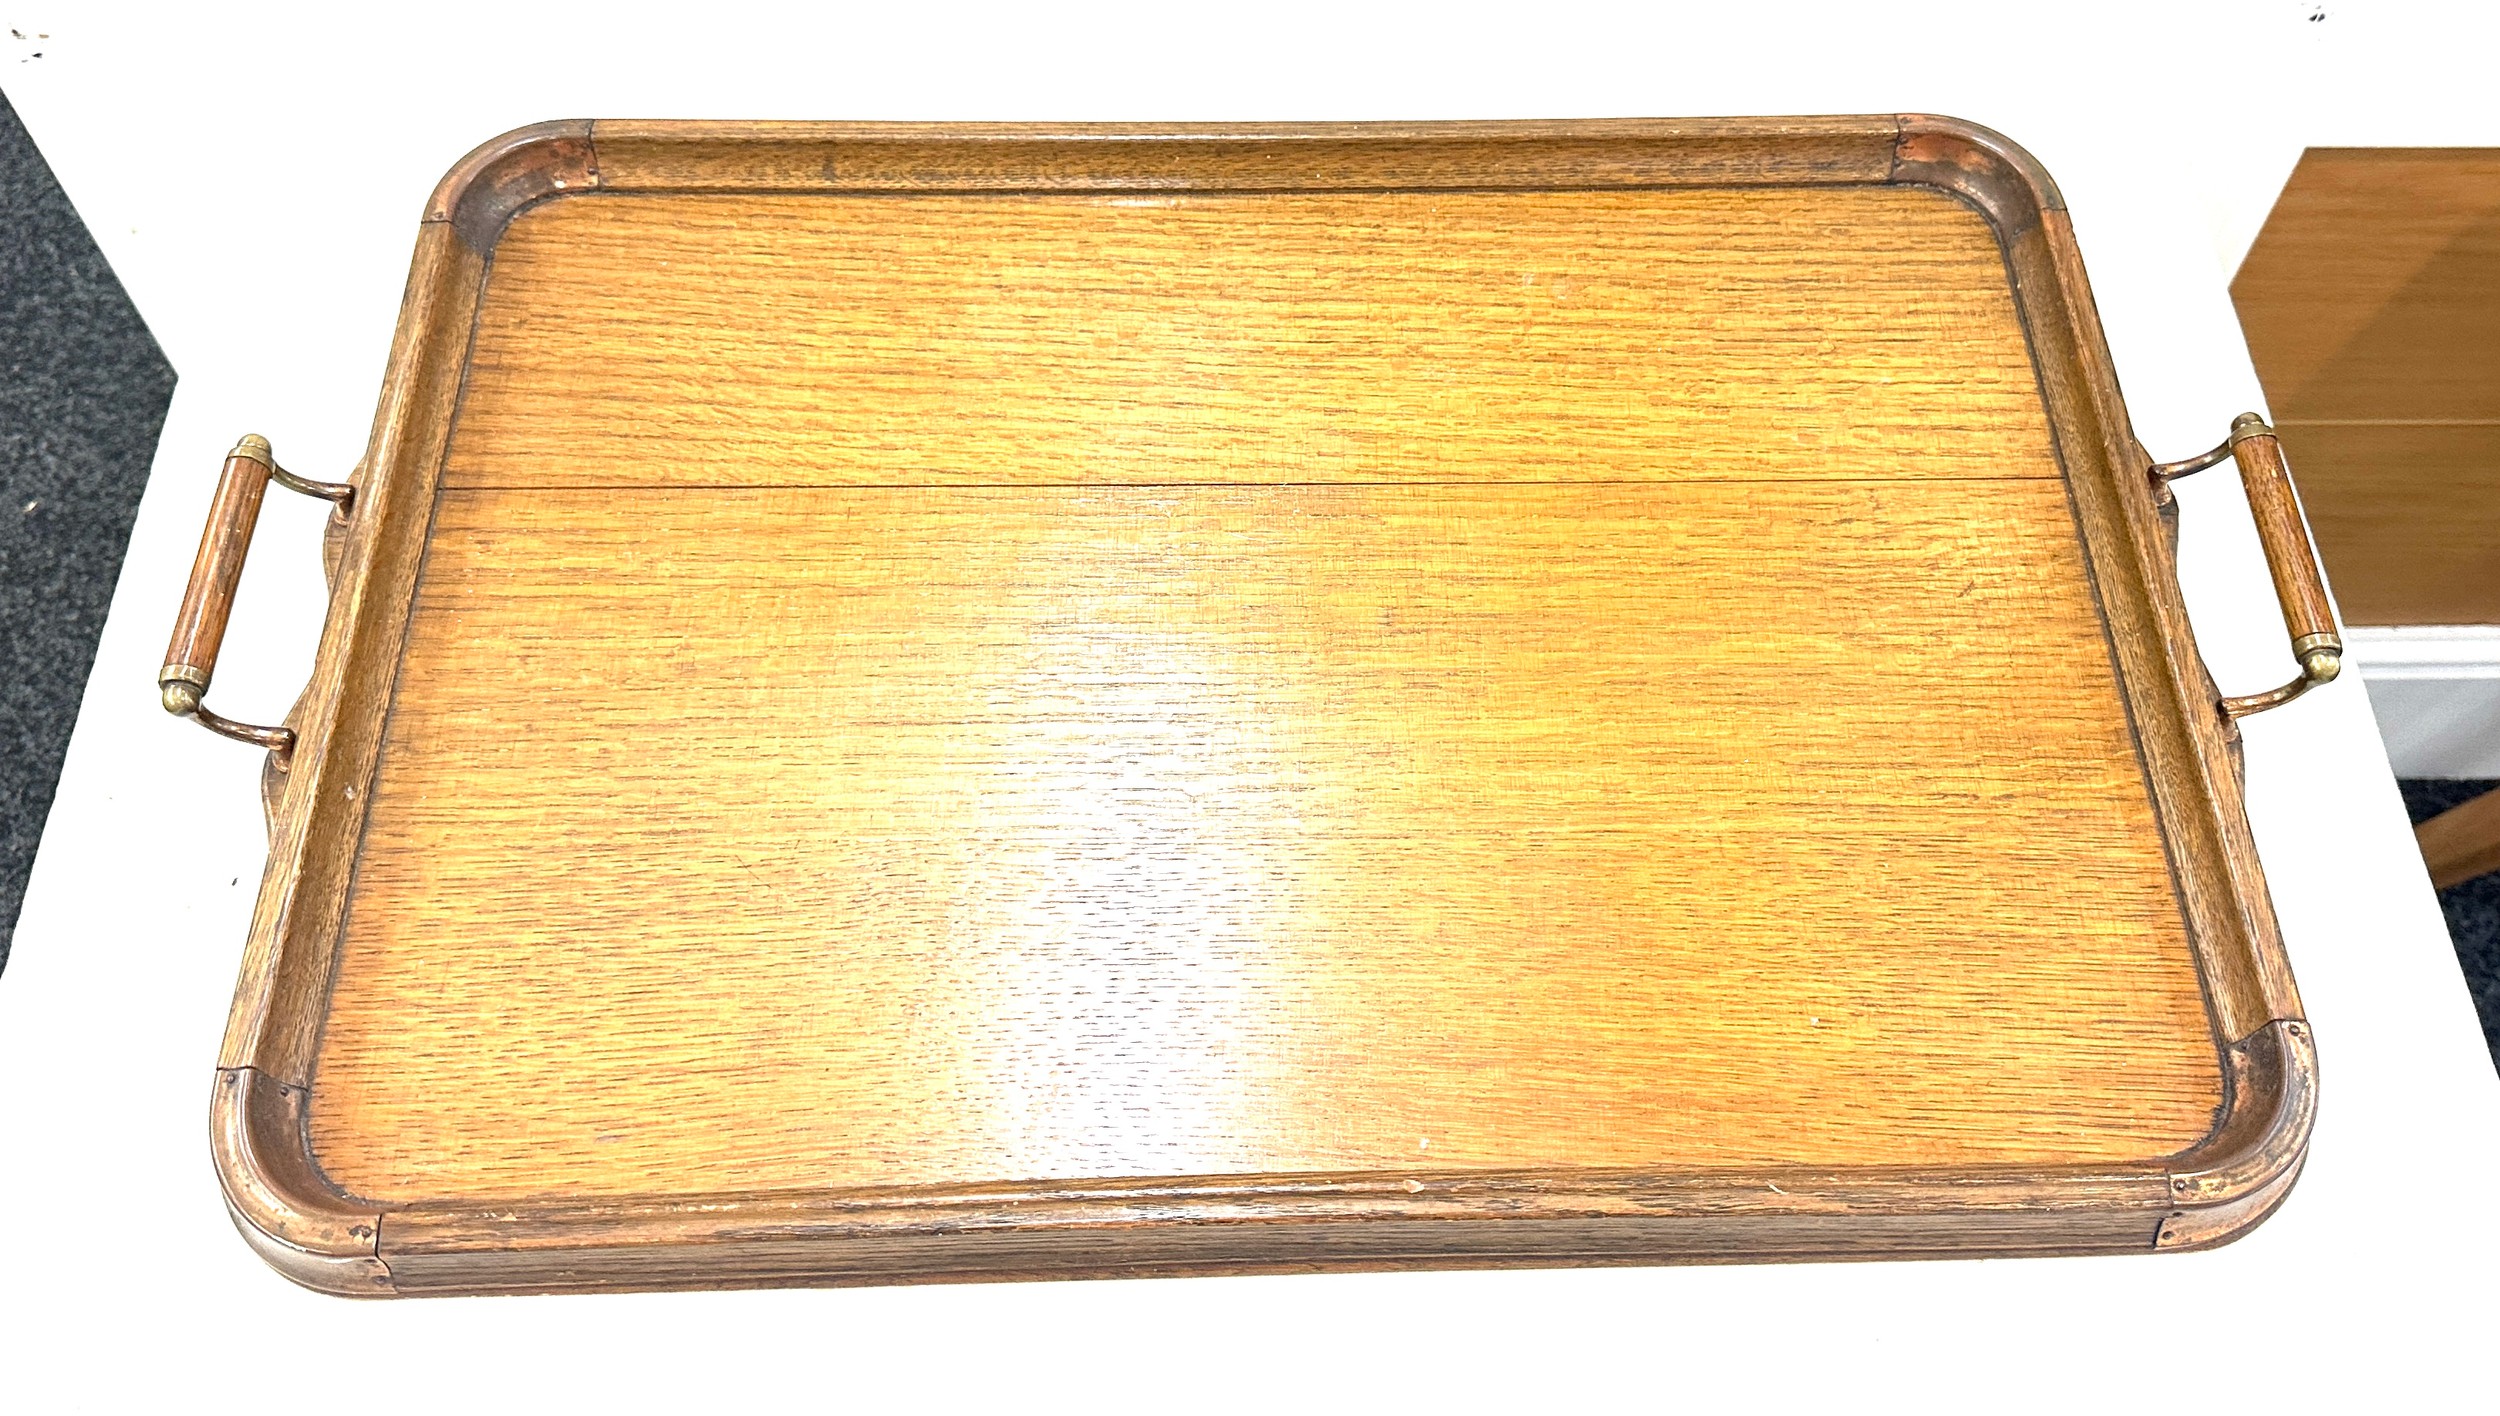 Antique 2 handled copper bound serving tray 23 inches wide by 16.5 inches - Image 2 of 3